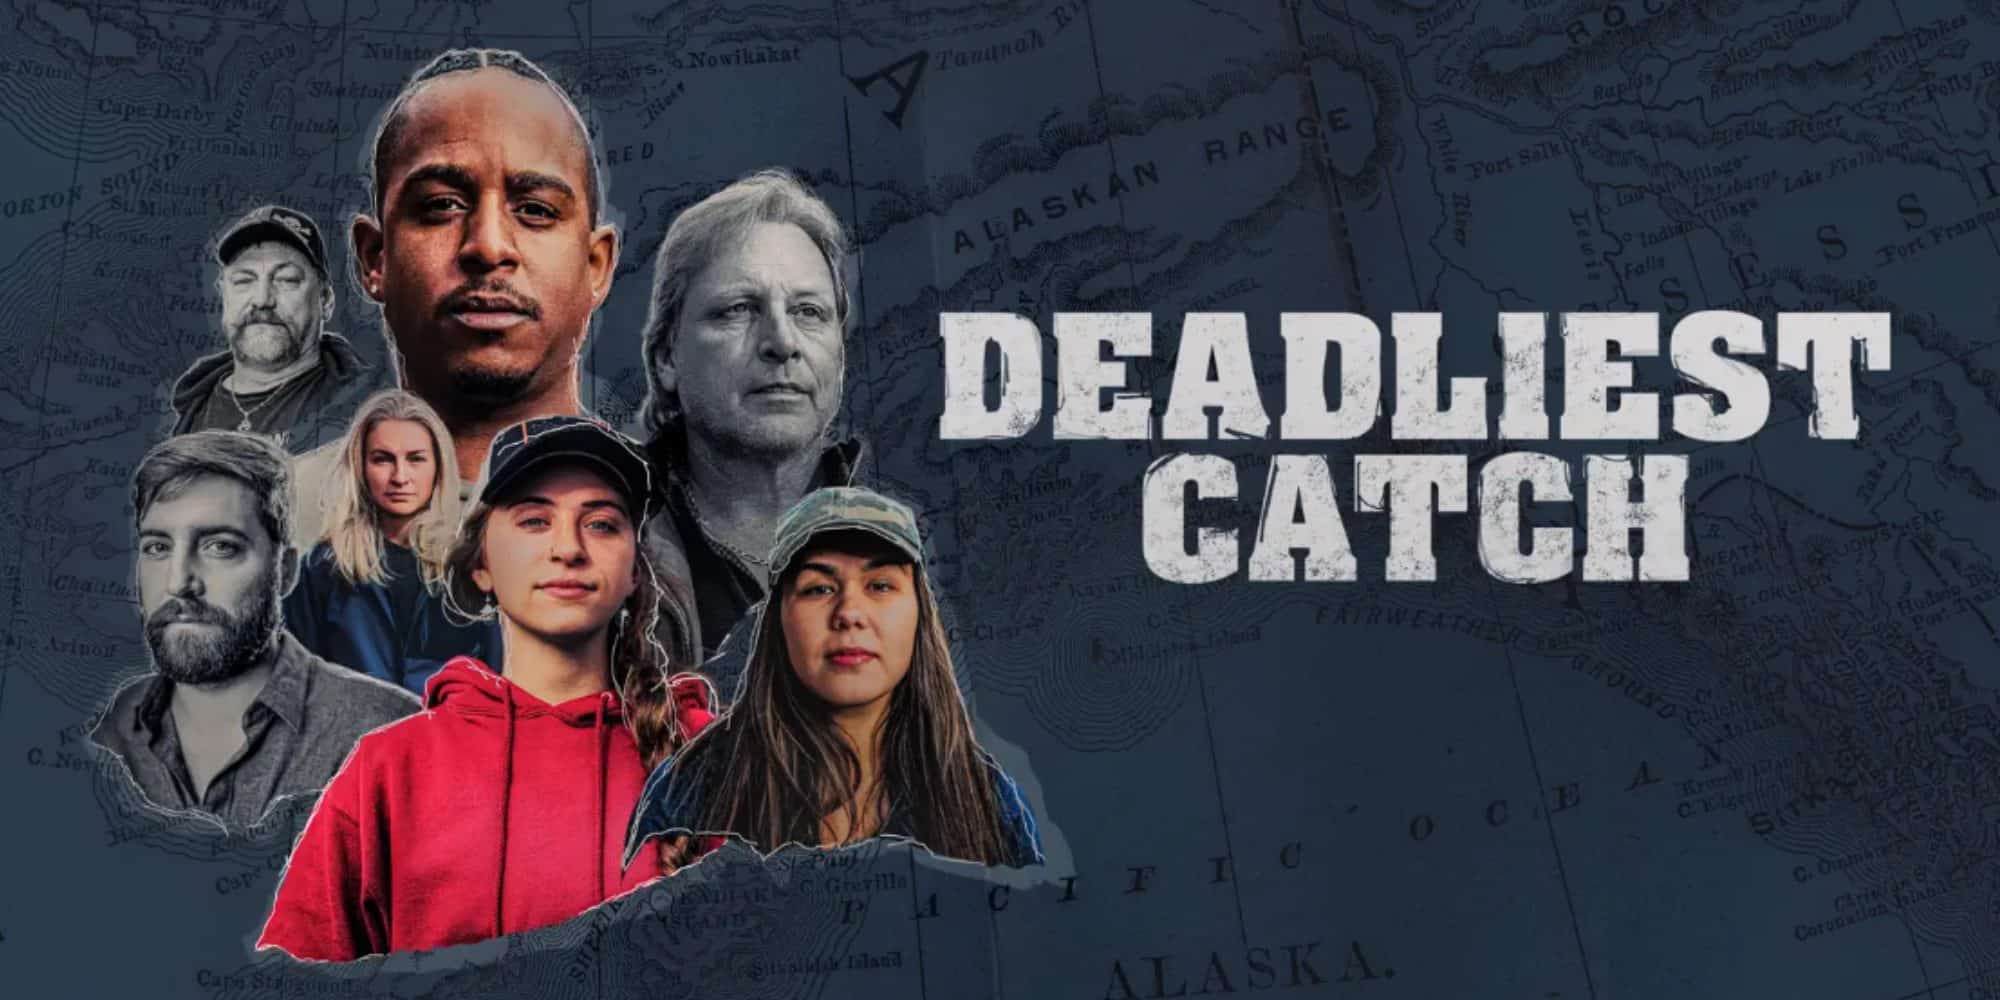 How To Watch Deadliest Catch Season 19 Episodes? Streaming Guide